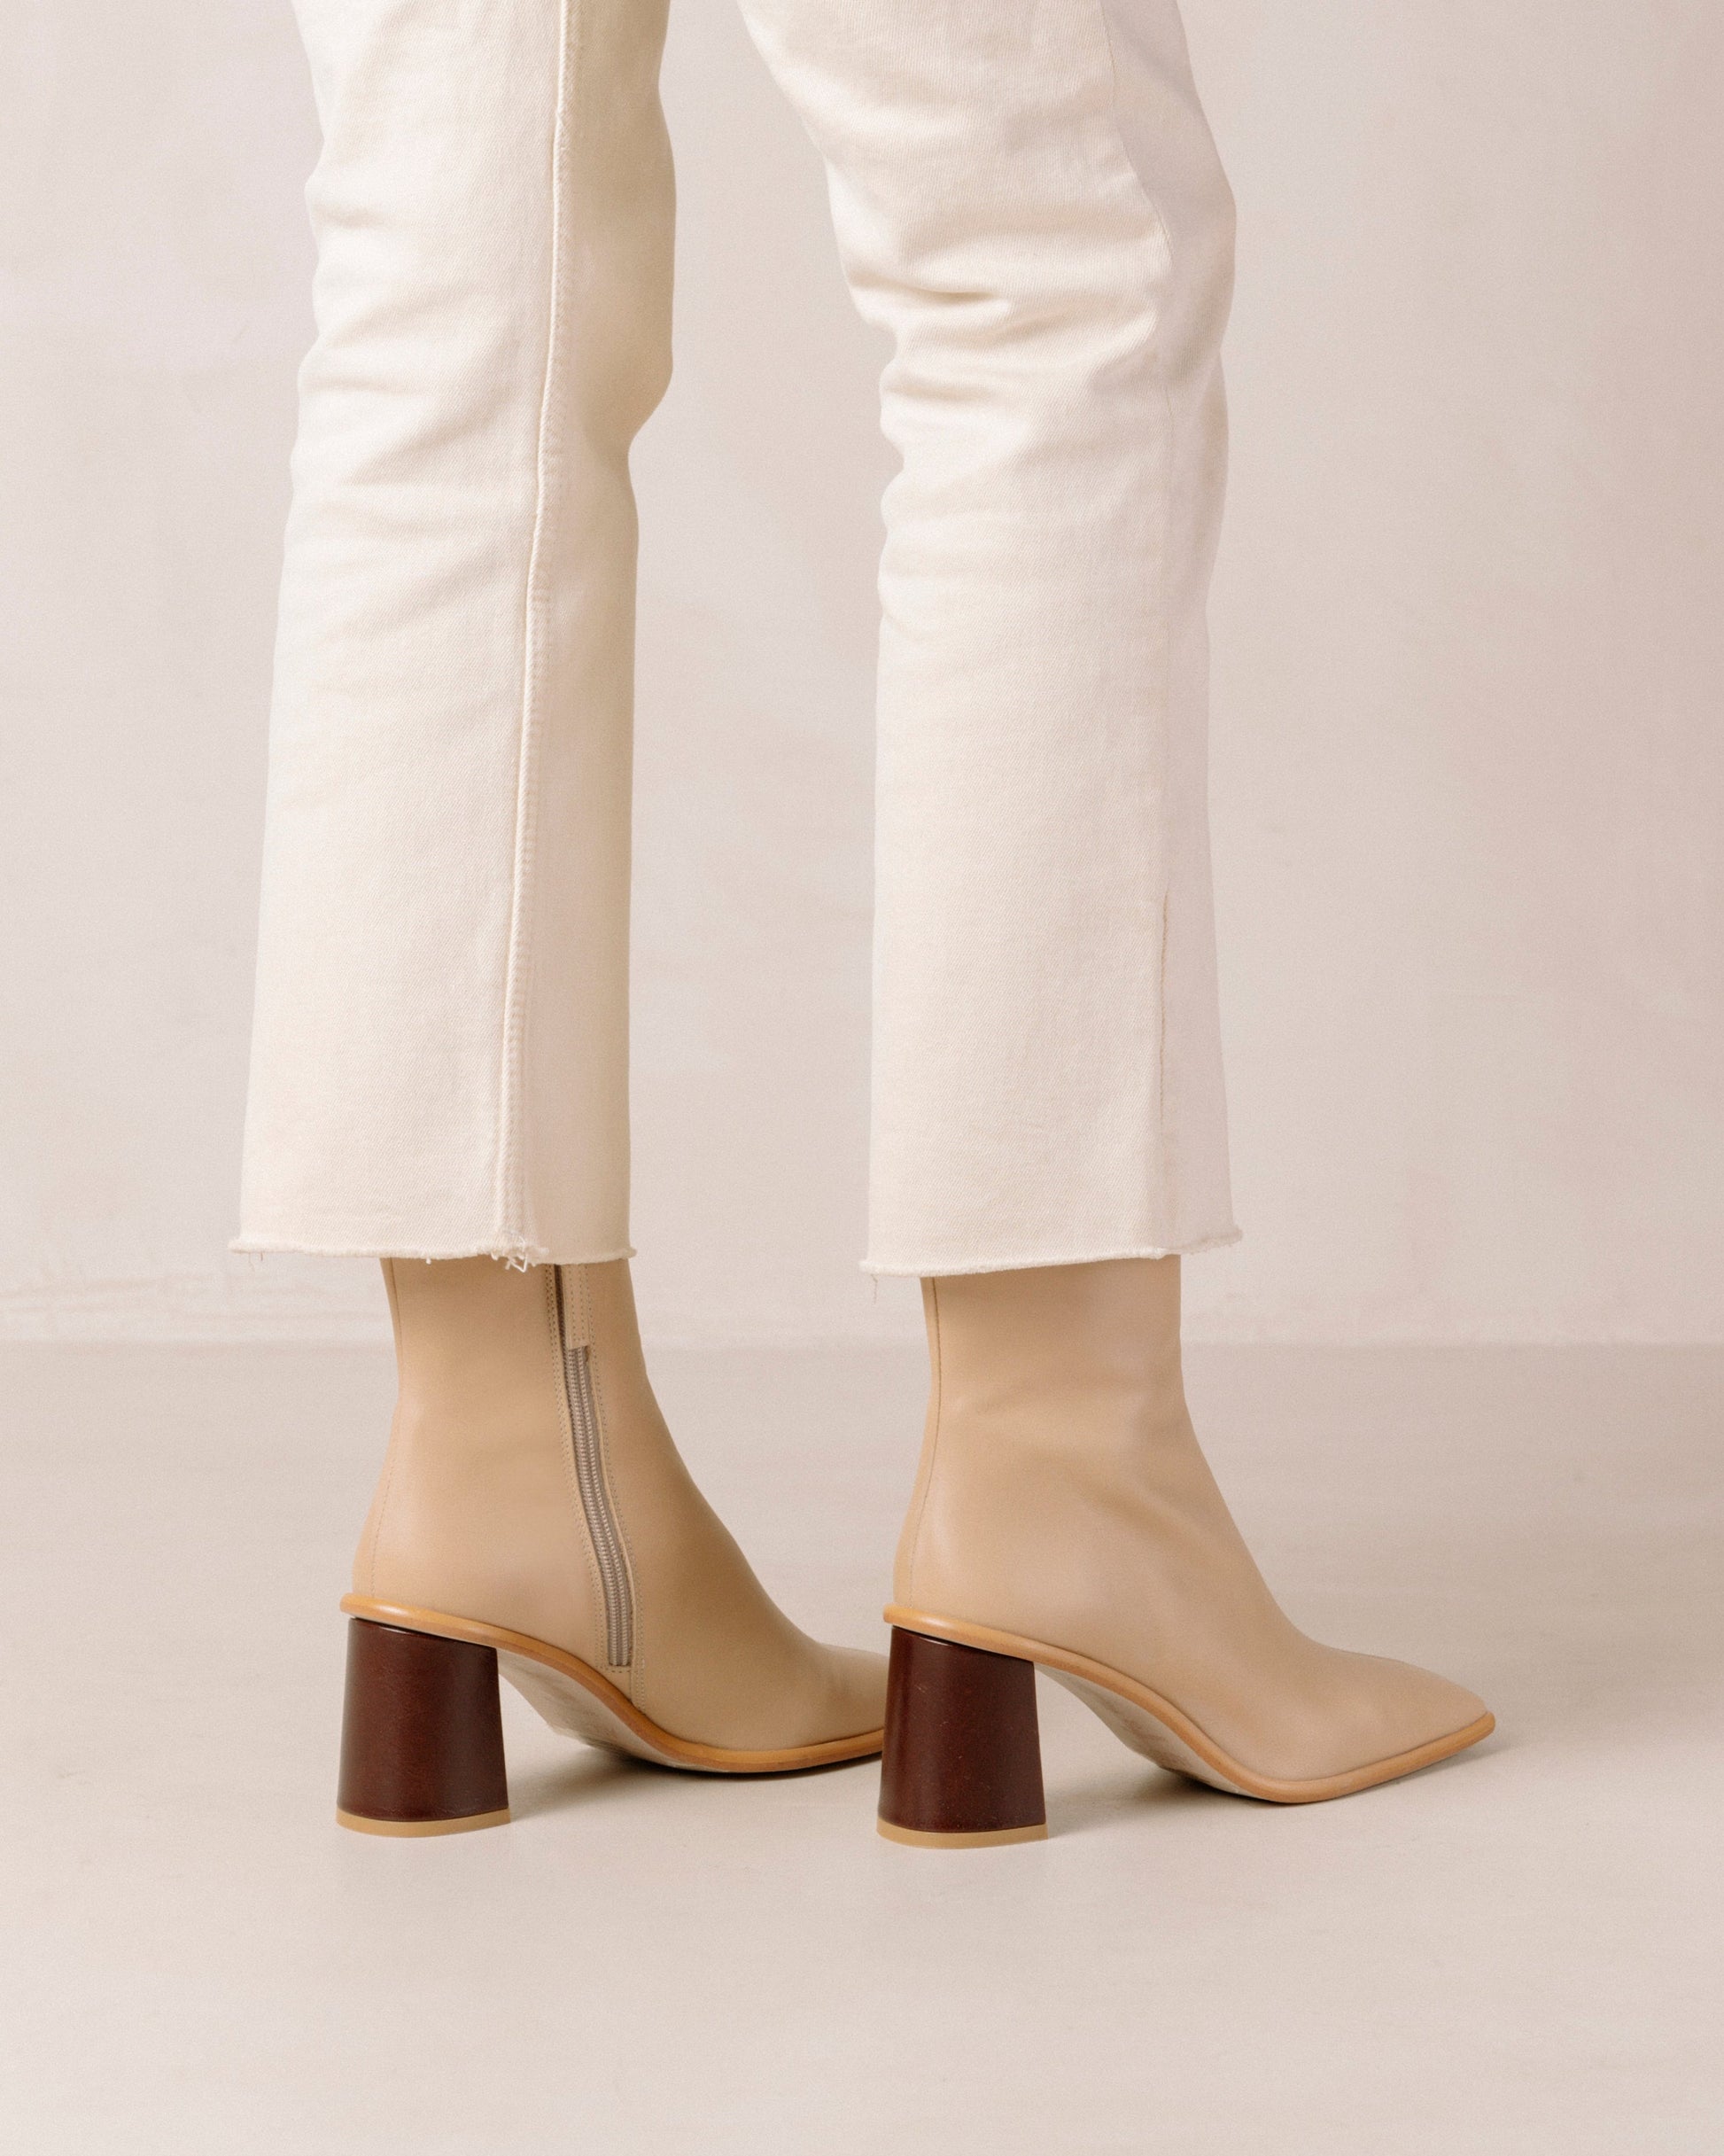 If you don’t know where to go, go West. These sustainable beige boots set atop a contrast block heel, with a slim line silhouette. Defined by their stone wash & square toe, these leather ankle booties also have inward facing zippers for extra comfort and feature a flattering, slim fit.